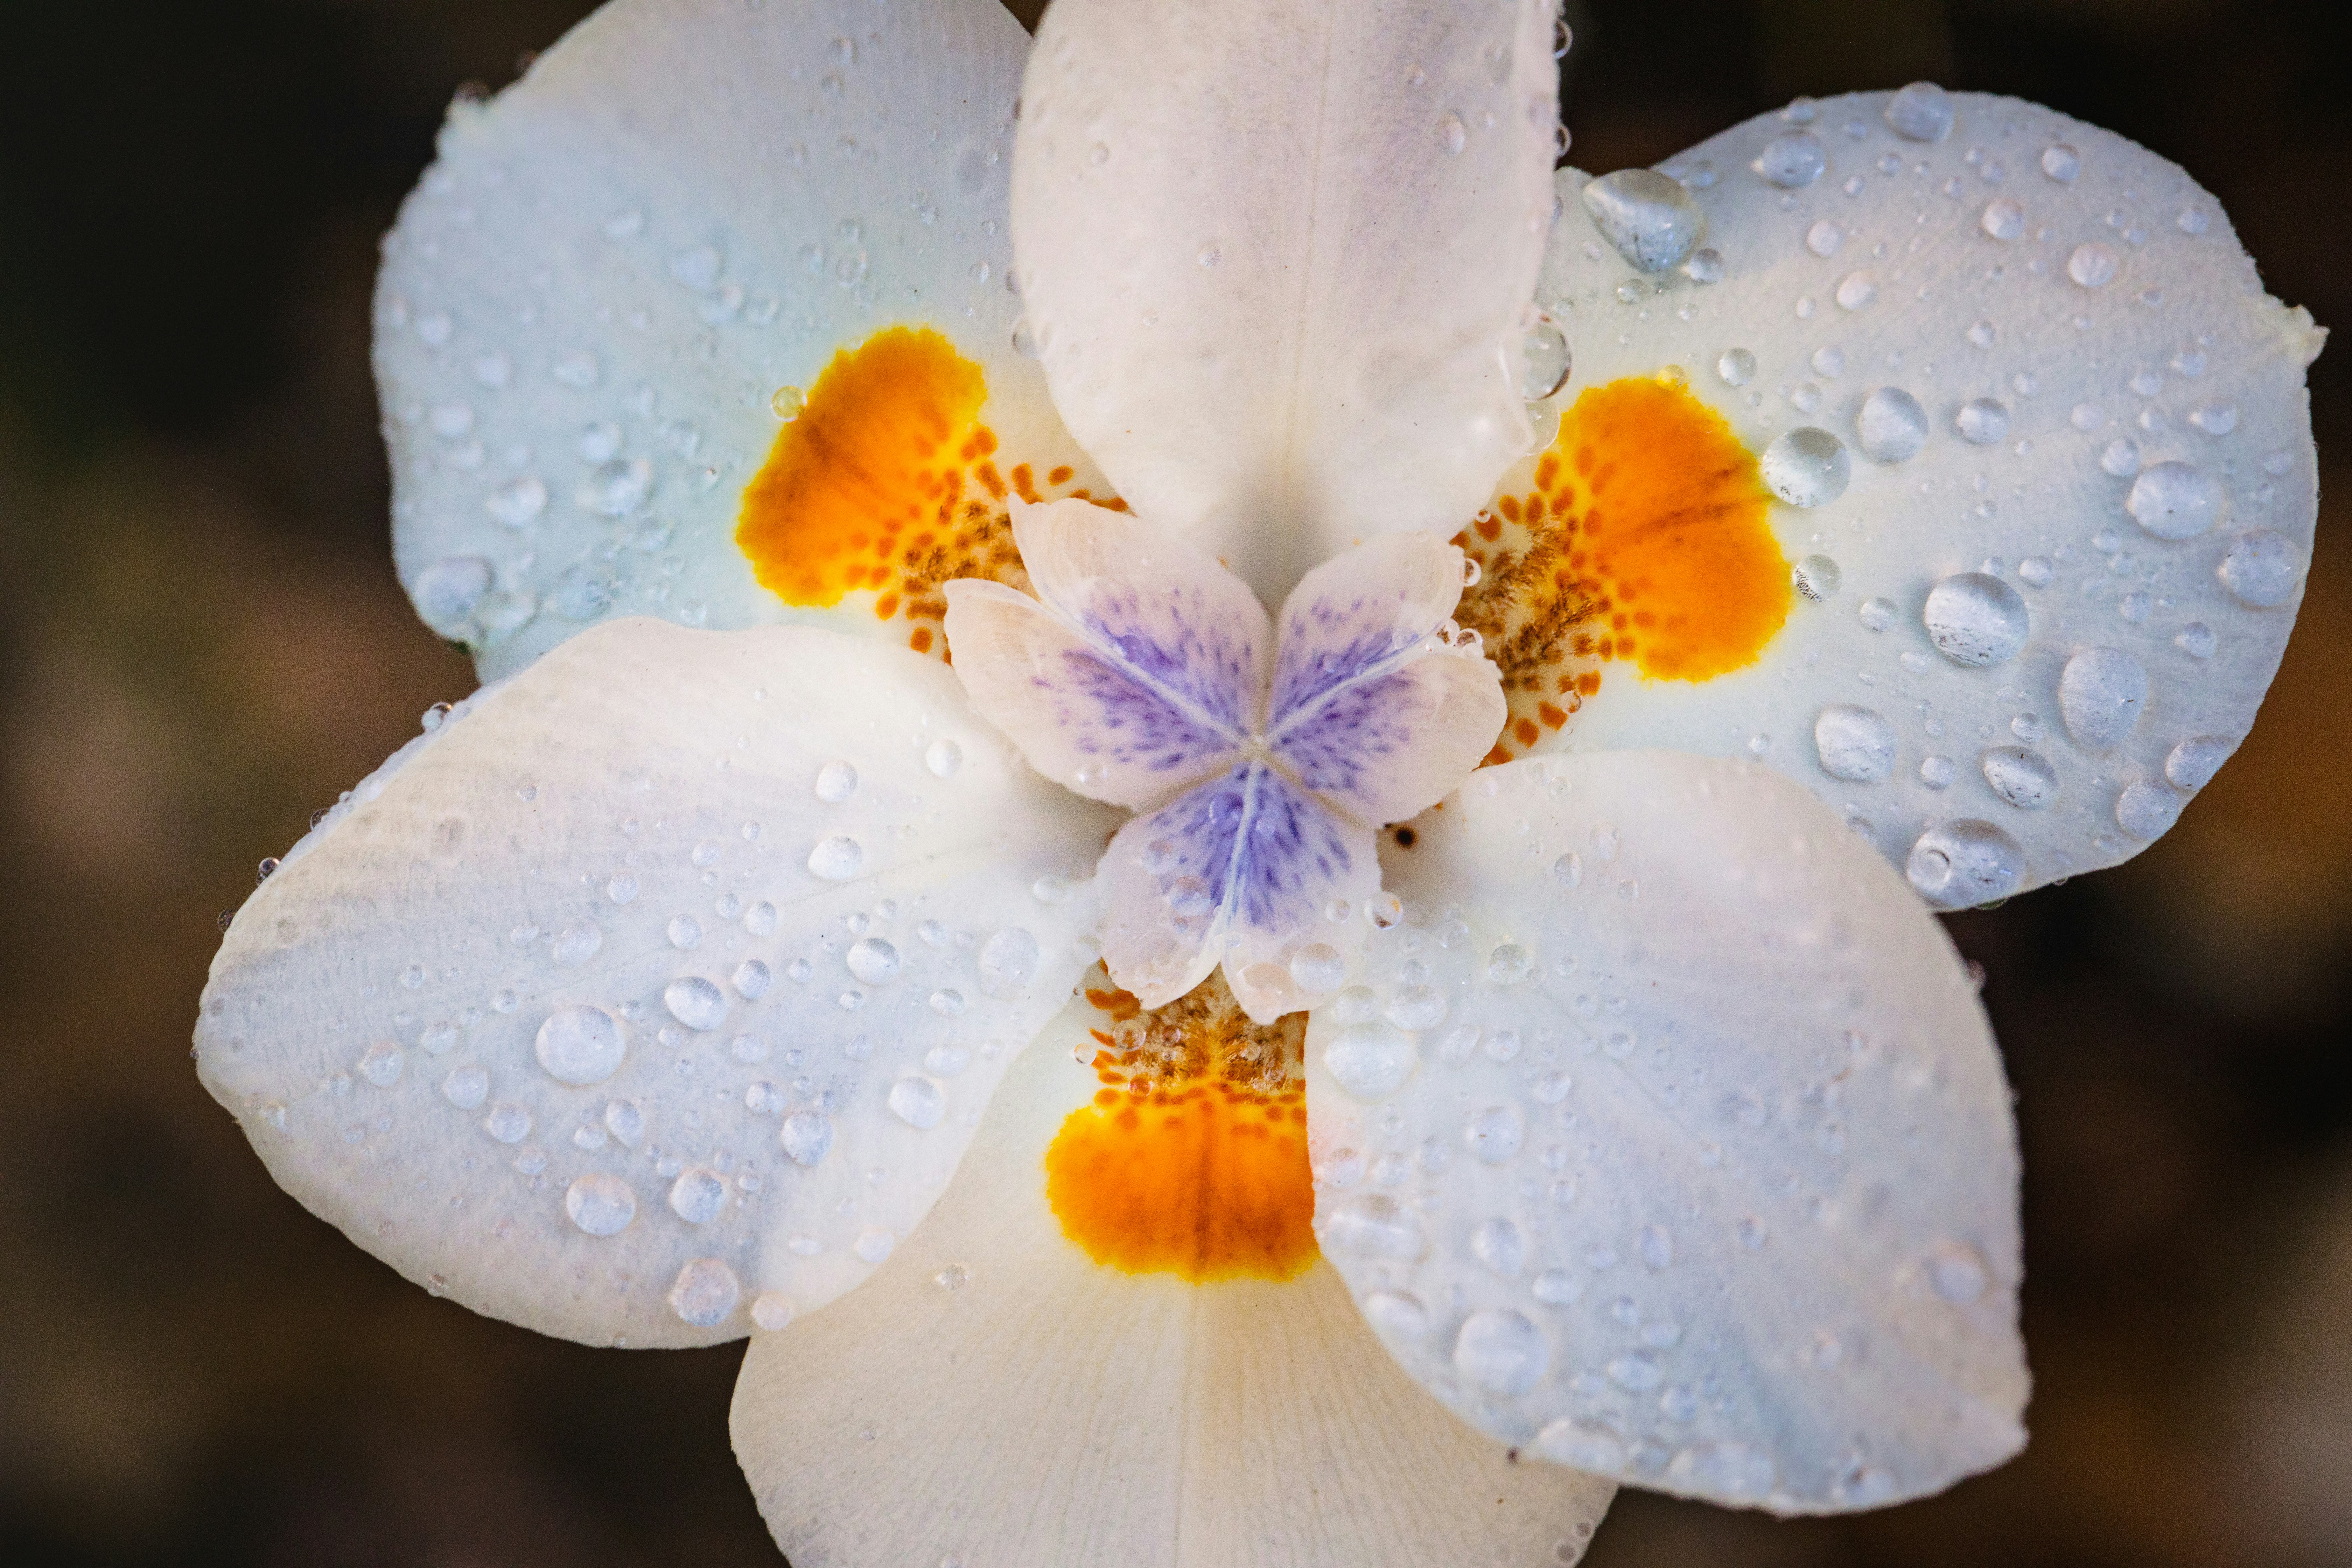 white and yellow flower with water droplets